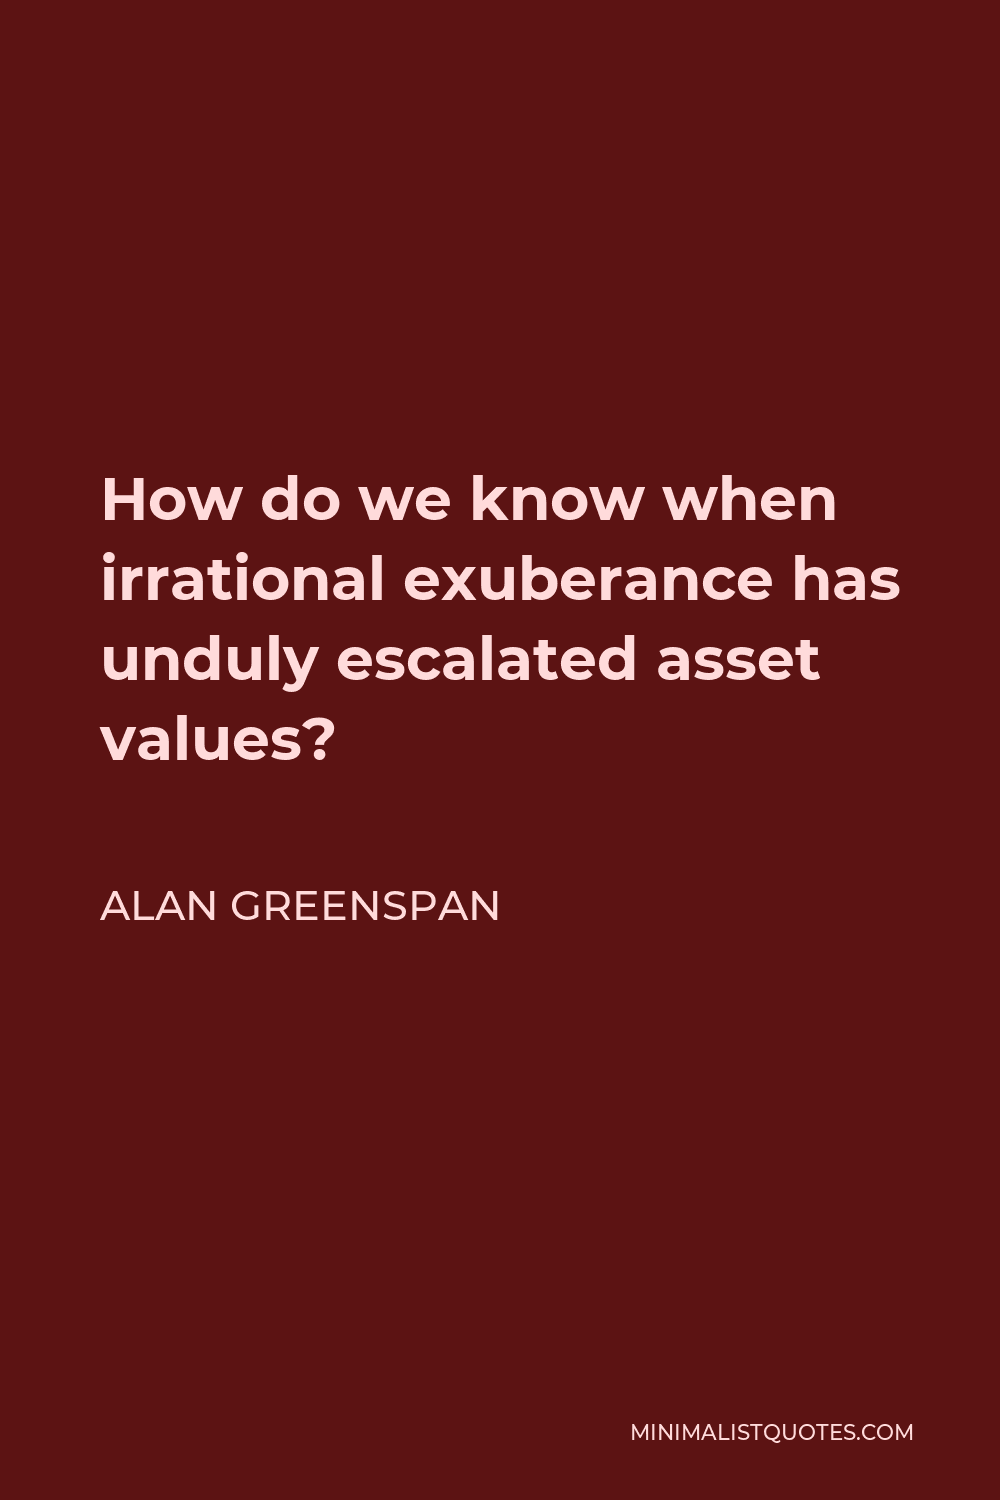 Alan Greenspan Quote - How do we know when irrational exuberance has unduly escalated asset values?